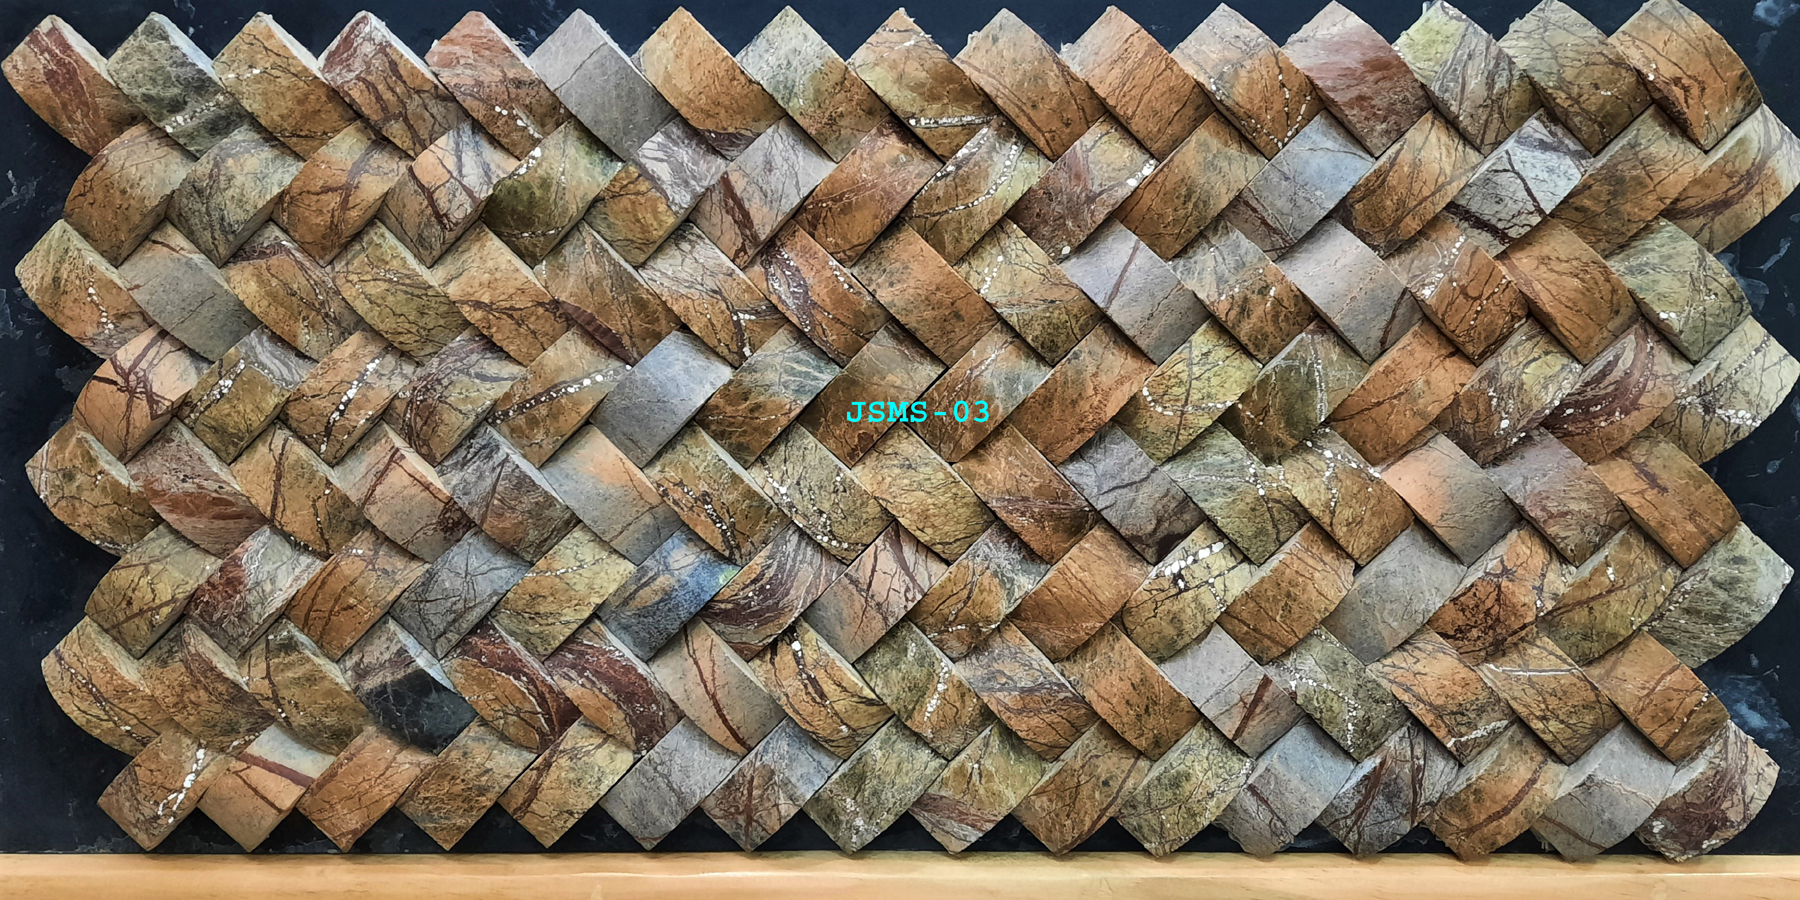 Latest Modern Popular Design Of Forest Stone Mosaic Tiles For Interior Wall Decoration